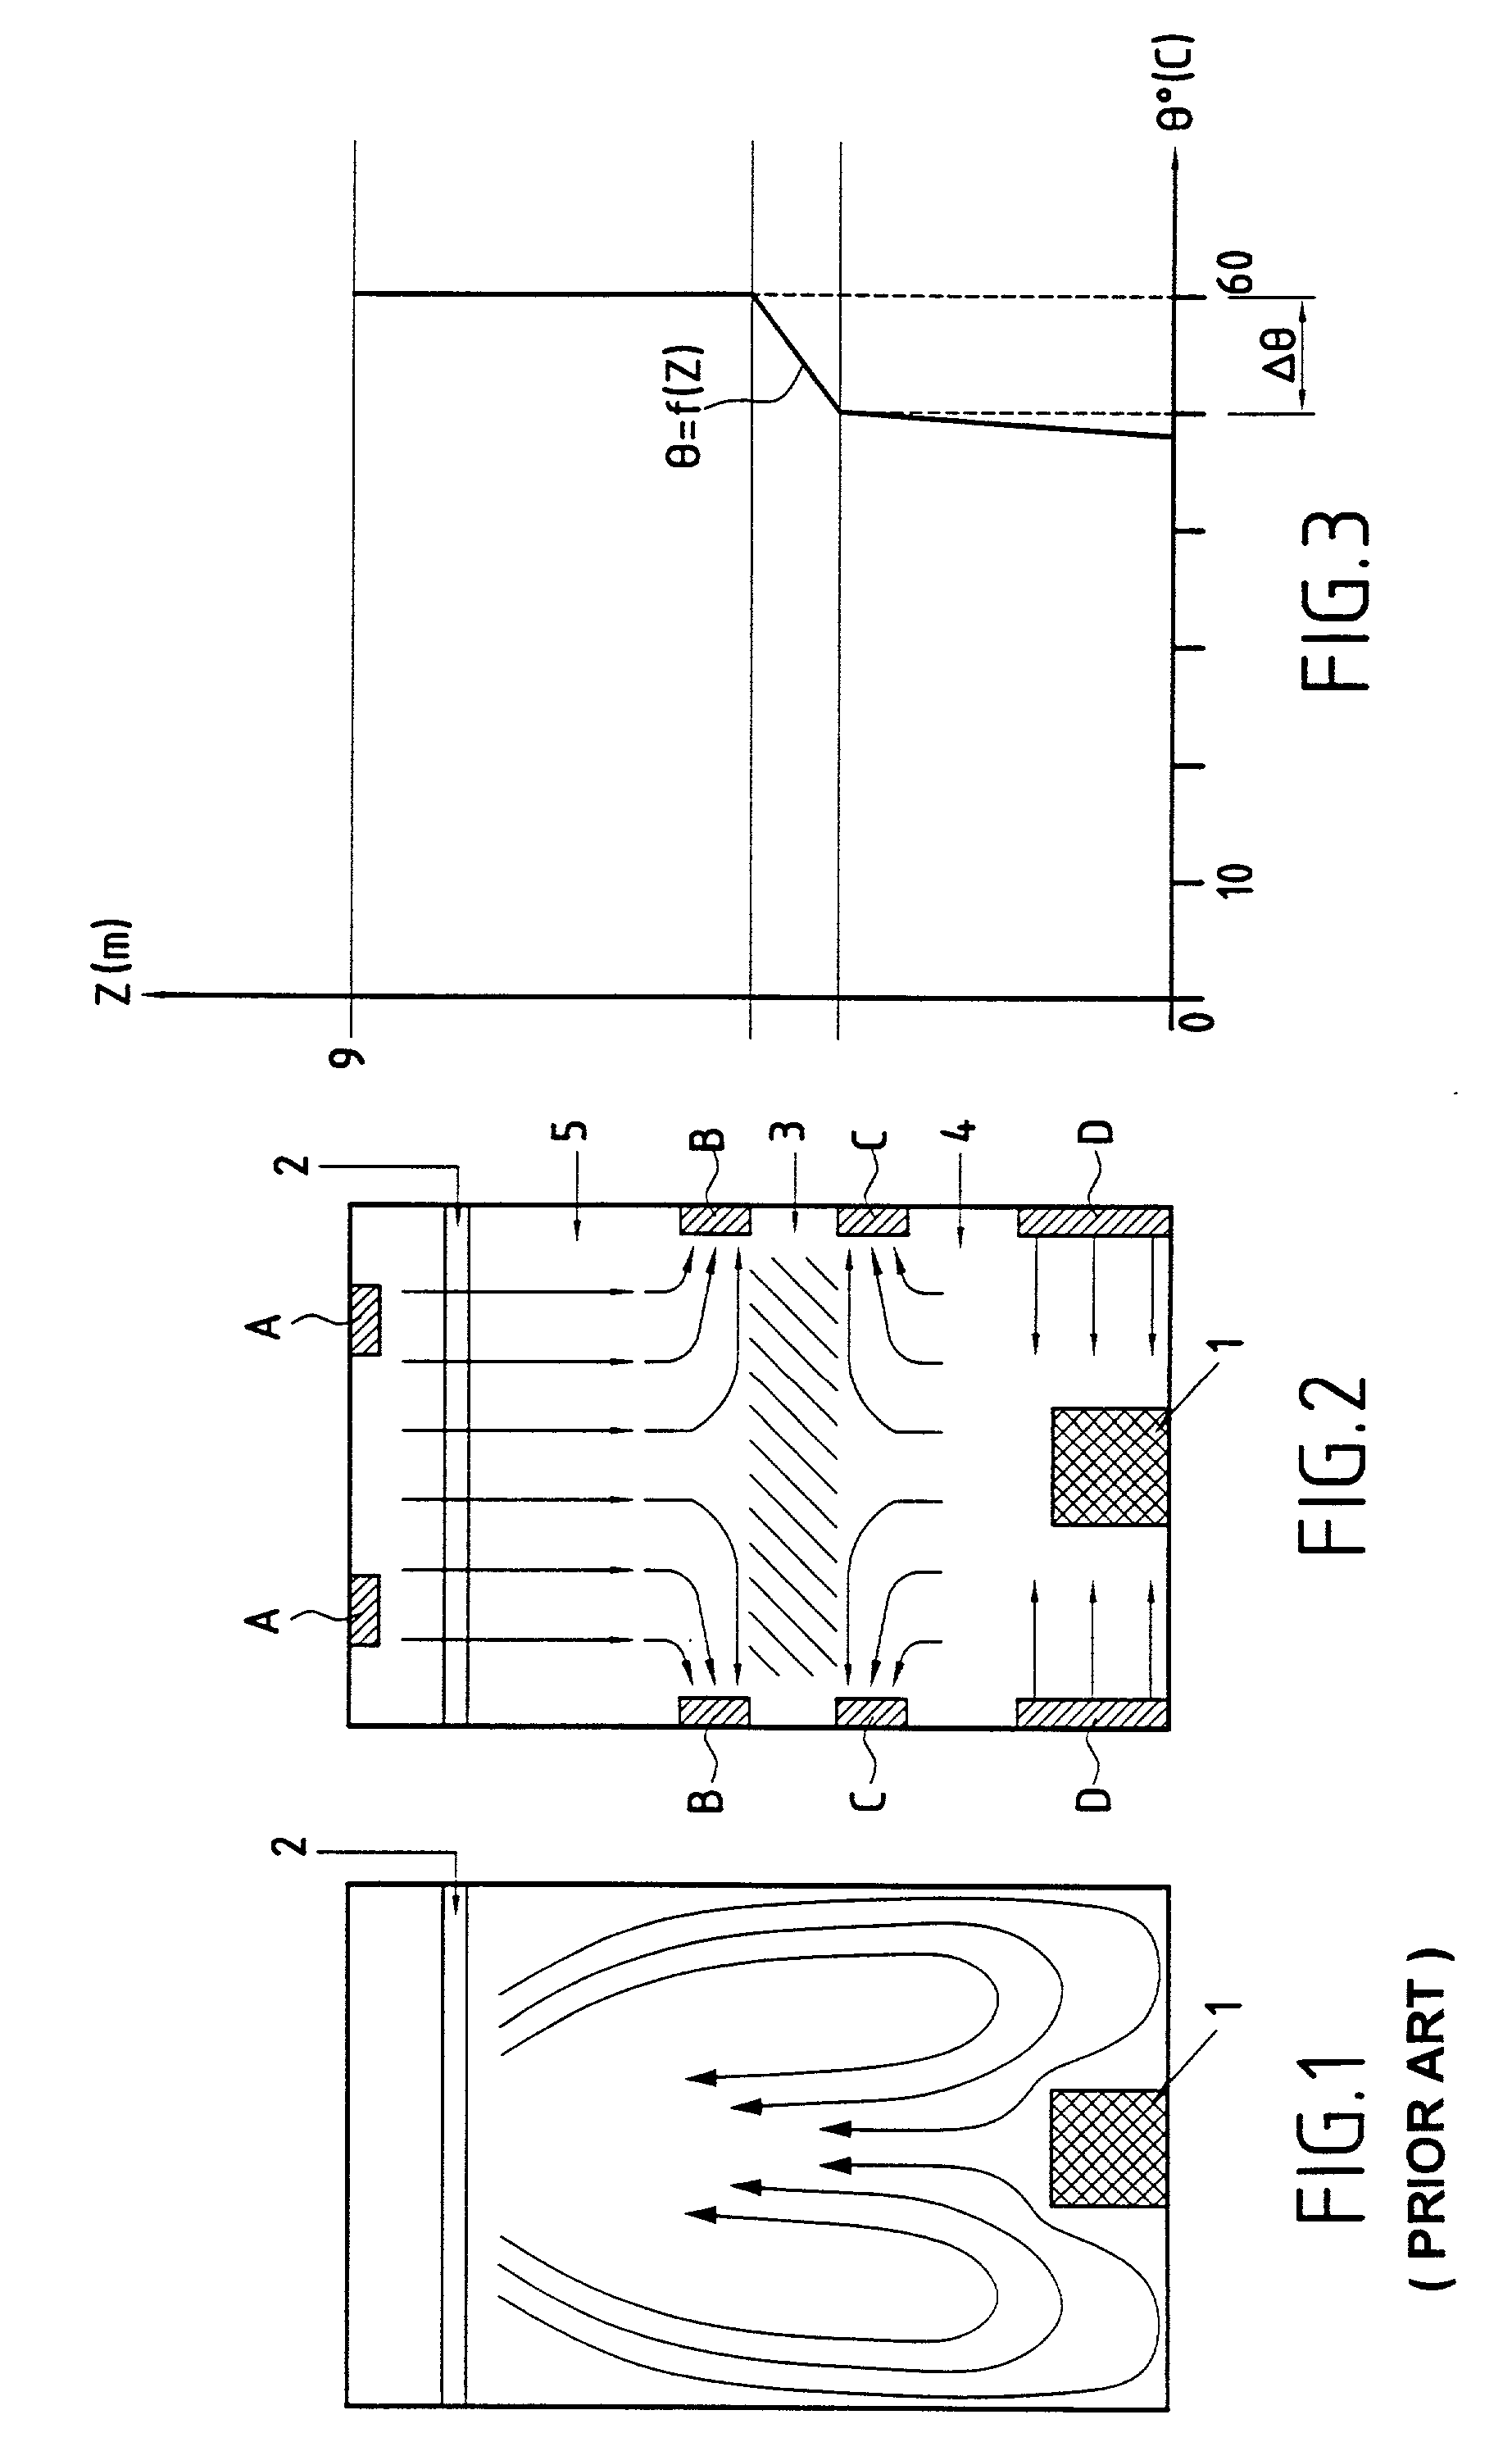 Method and apparatus for performing confinement by thermal stratification